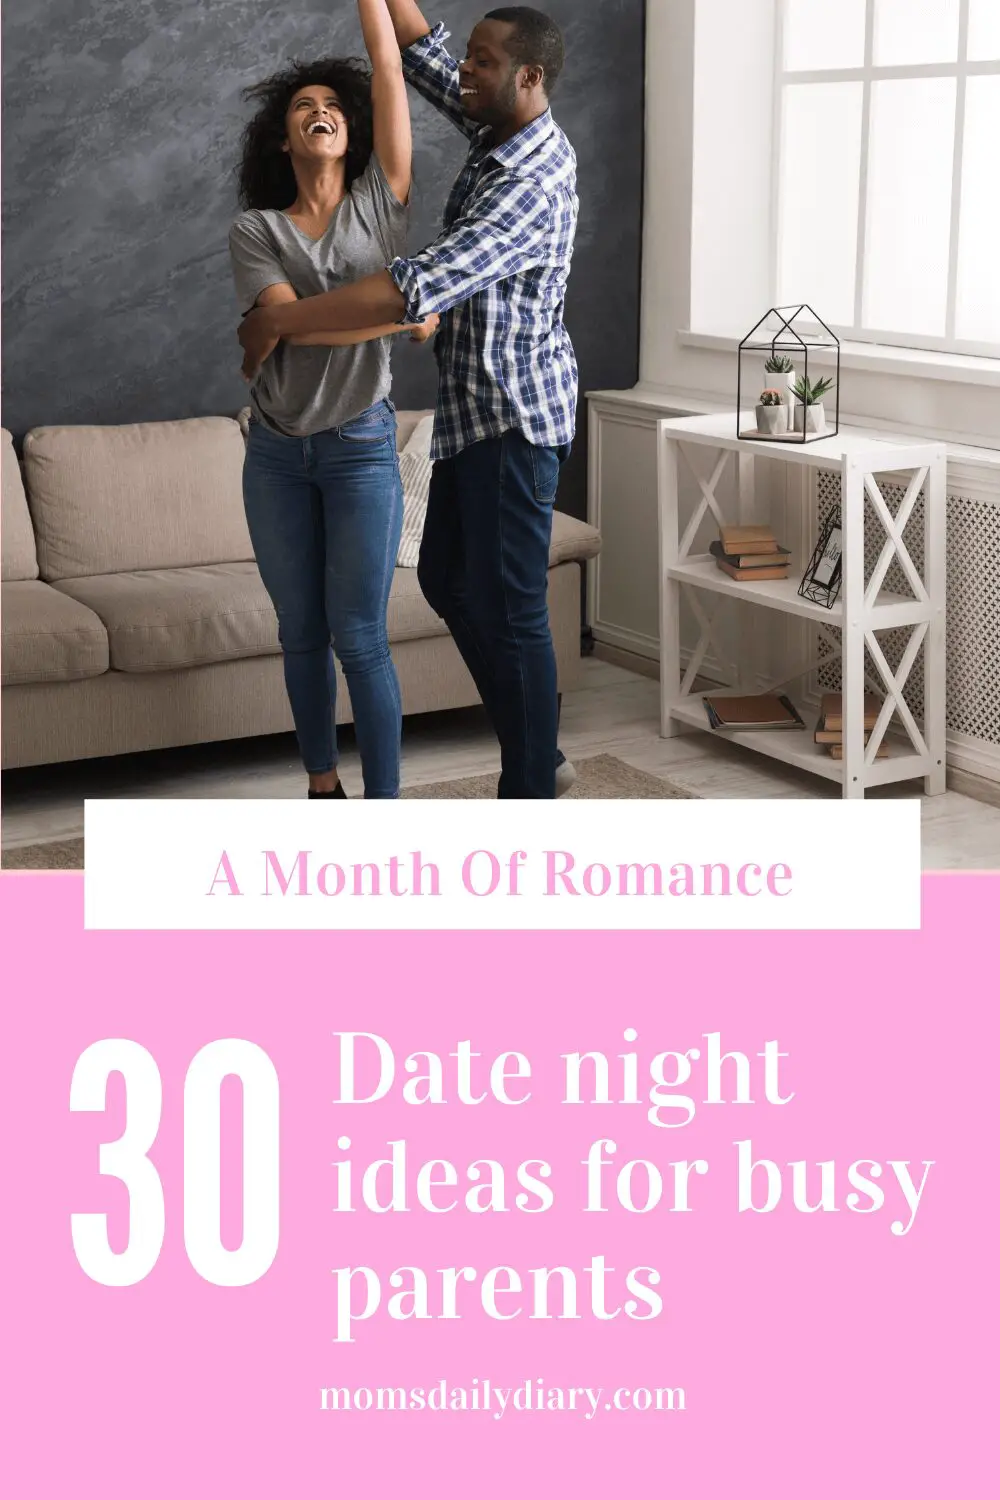 How long since you've last danced to "your song"? For more simple date night ideas for busy parents check out this post.